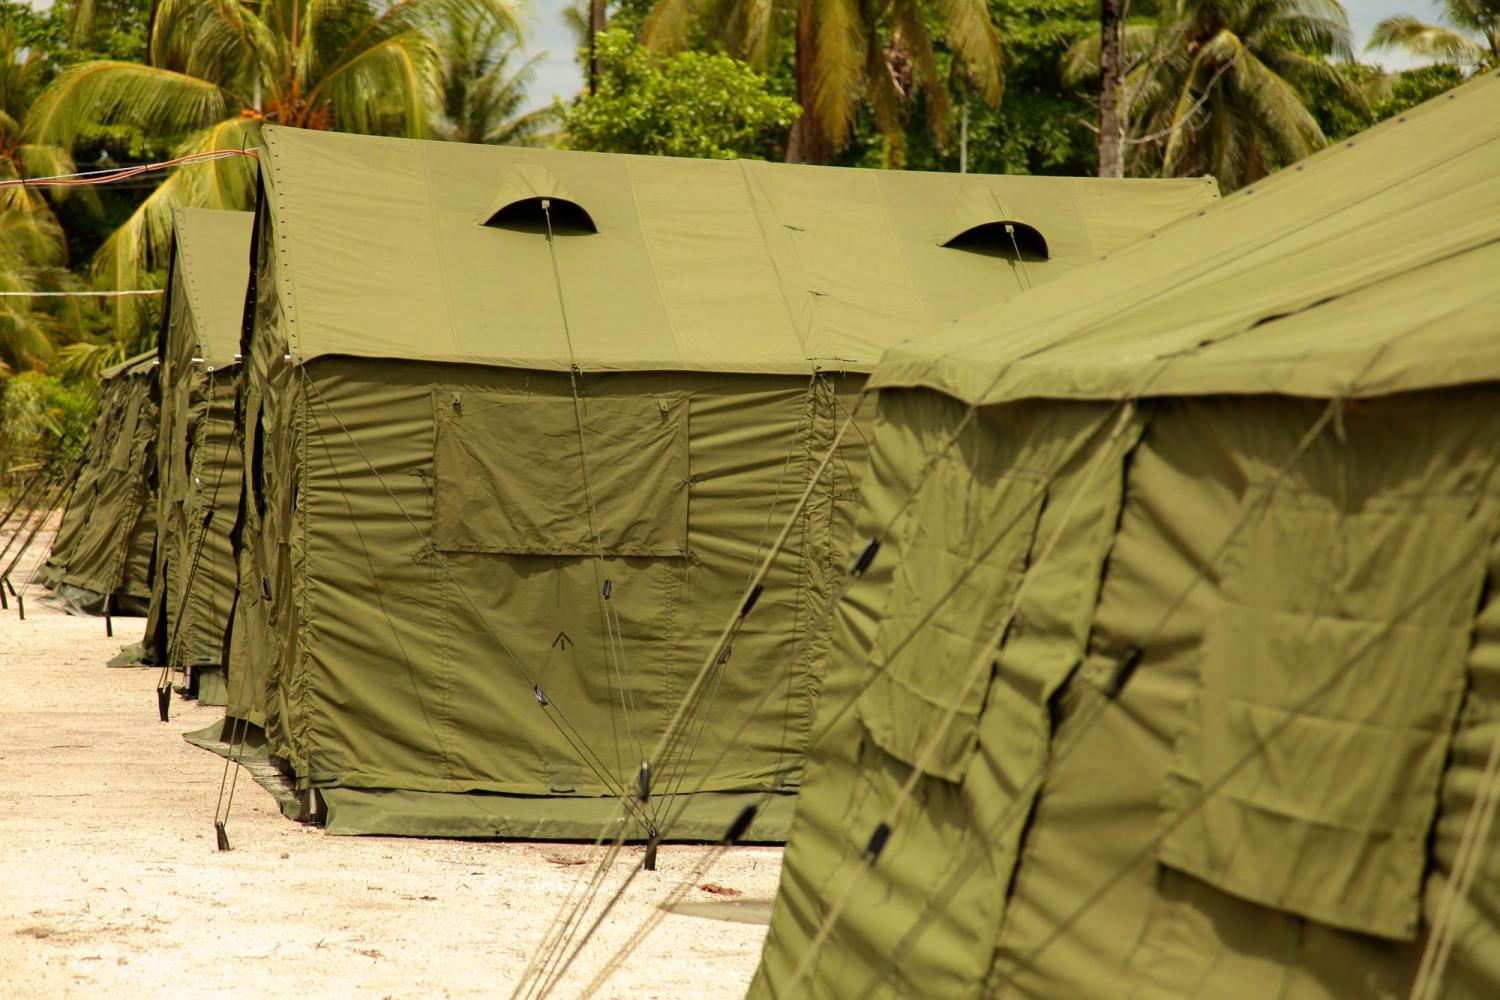 Manus Island Detention Centre. Photo by the Australian Department of Immigration and Citizenship via Getty Images